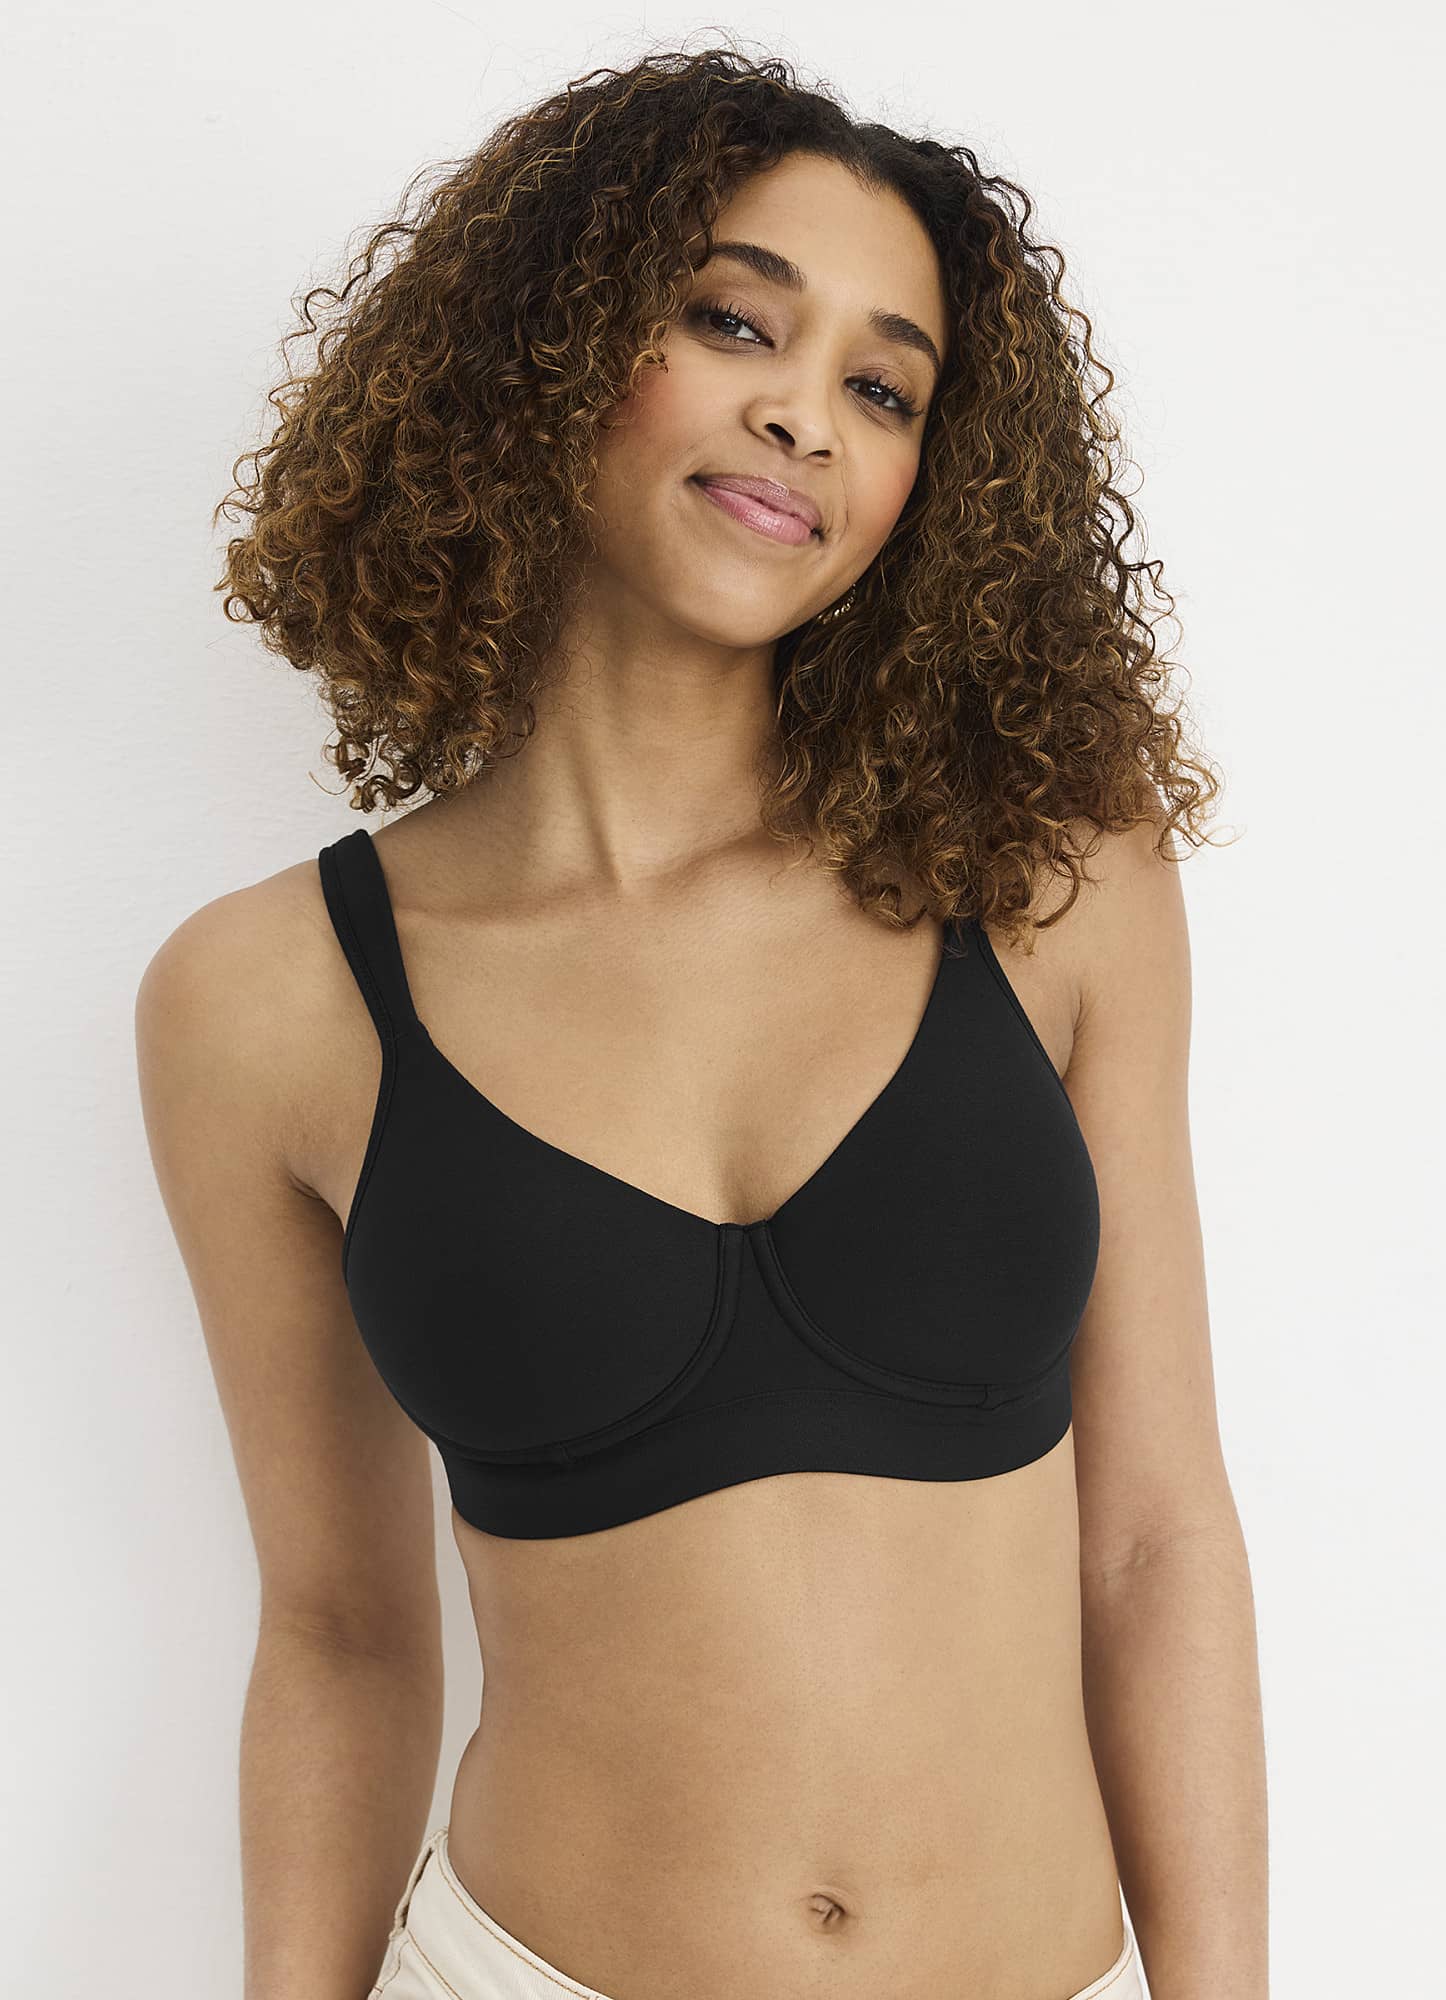 Jockey® Cooling Cotton Blend Wirefree Full Coverage Bra